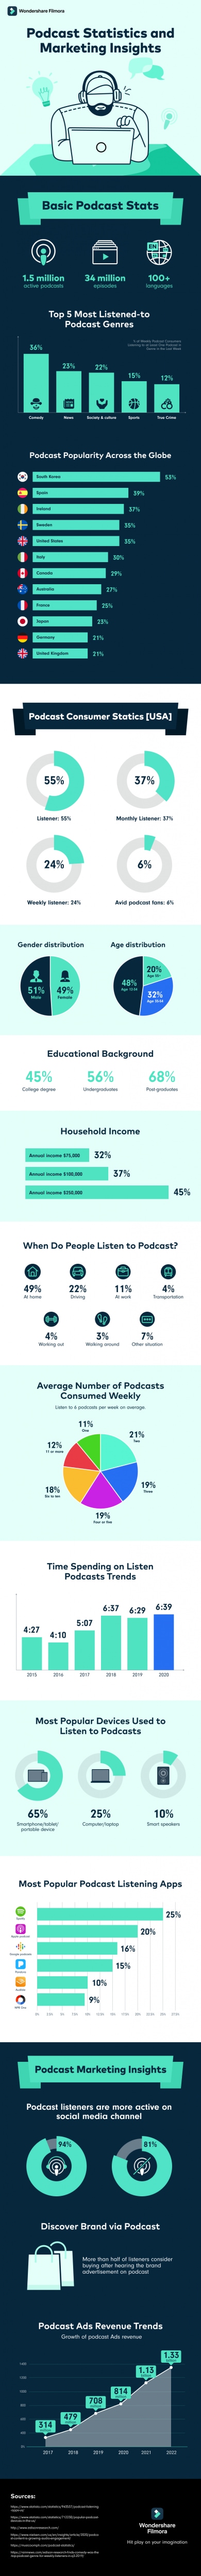 Podcast Stats and Marketing Insight infographic